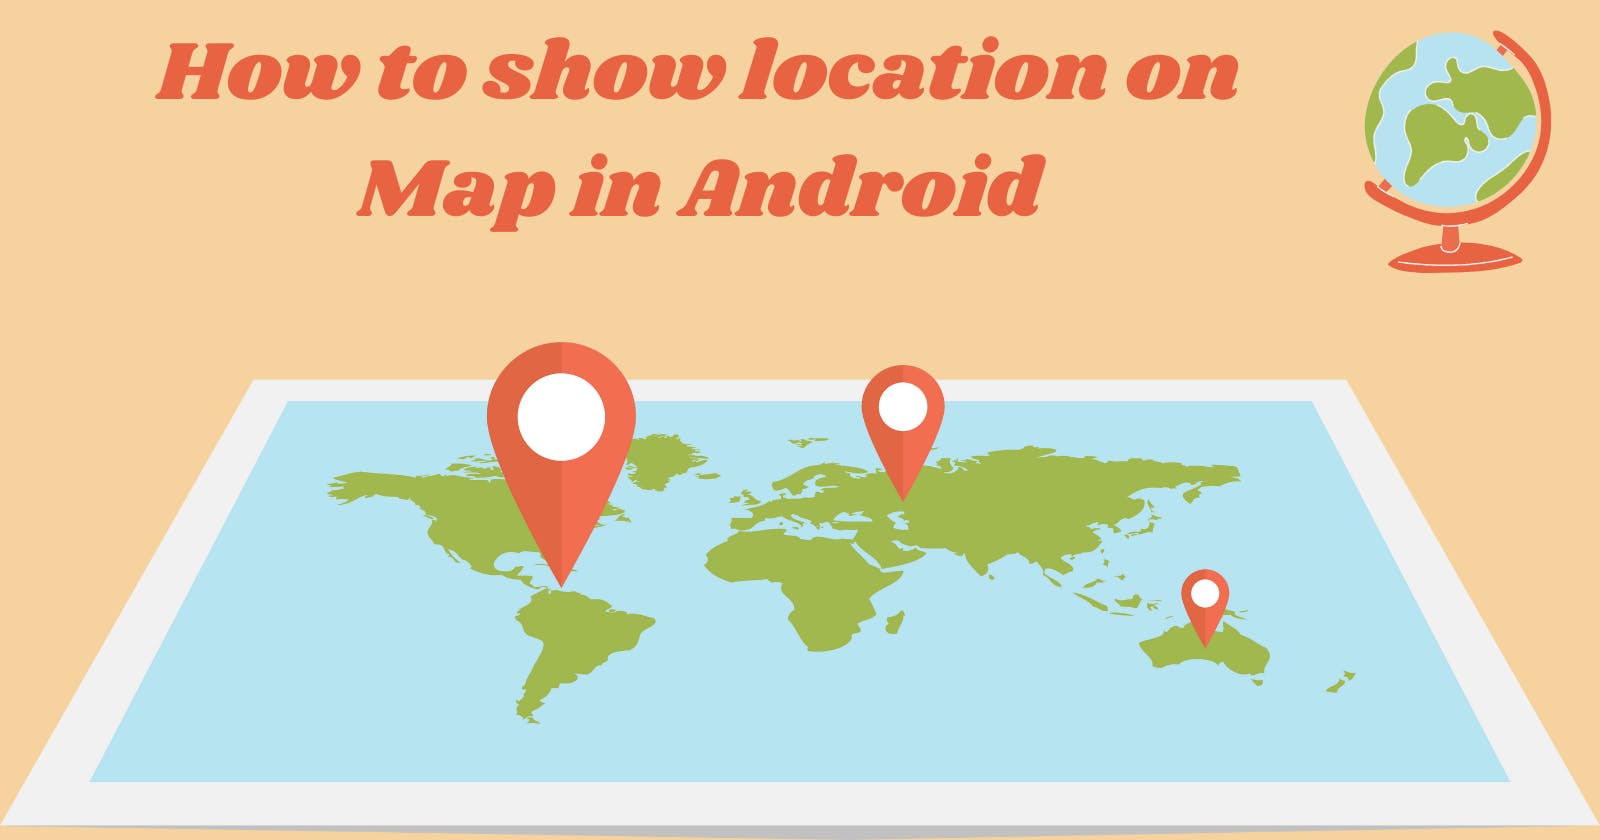 How to show location on Map in Android